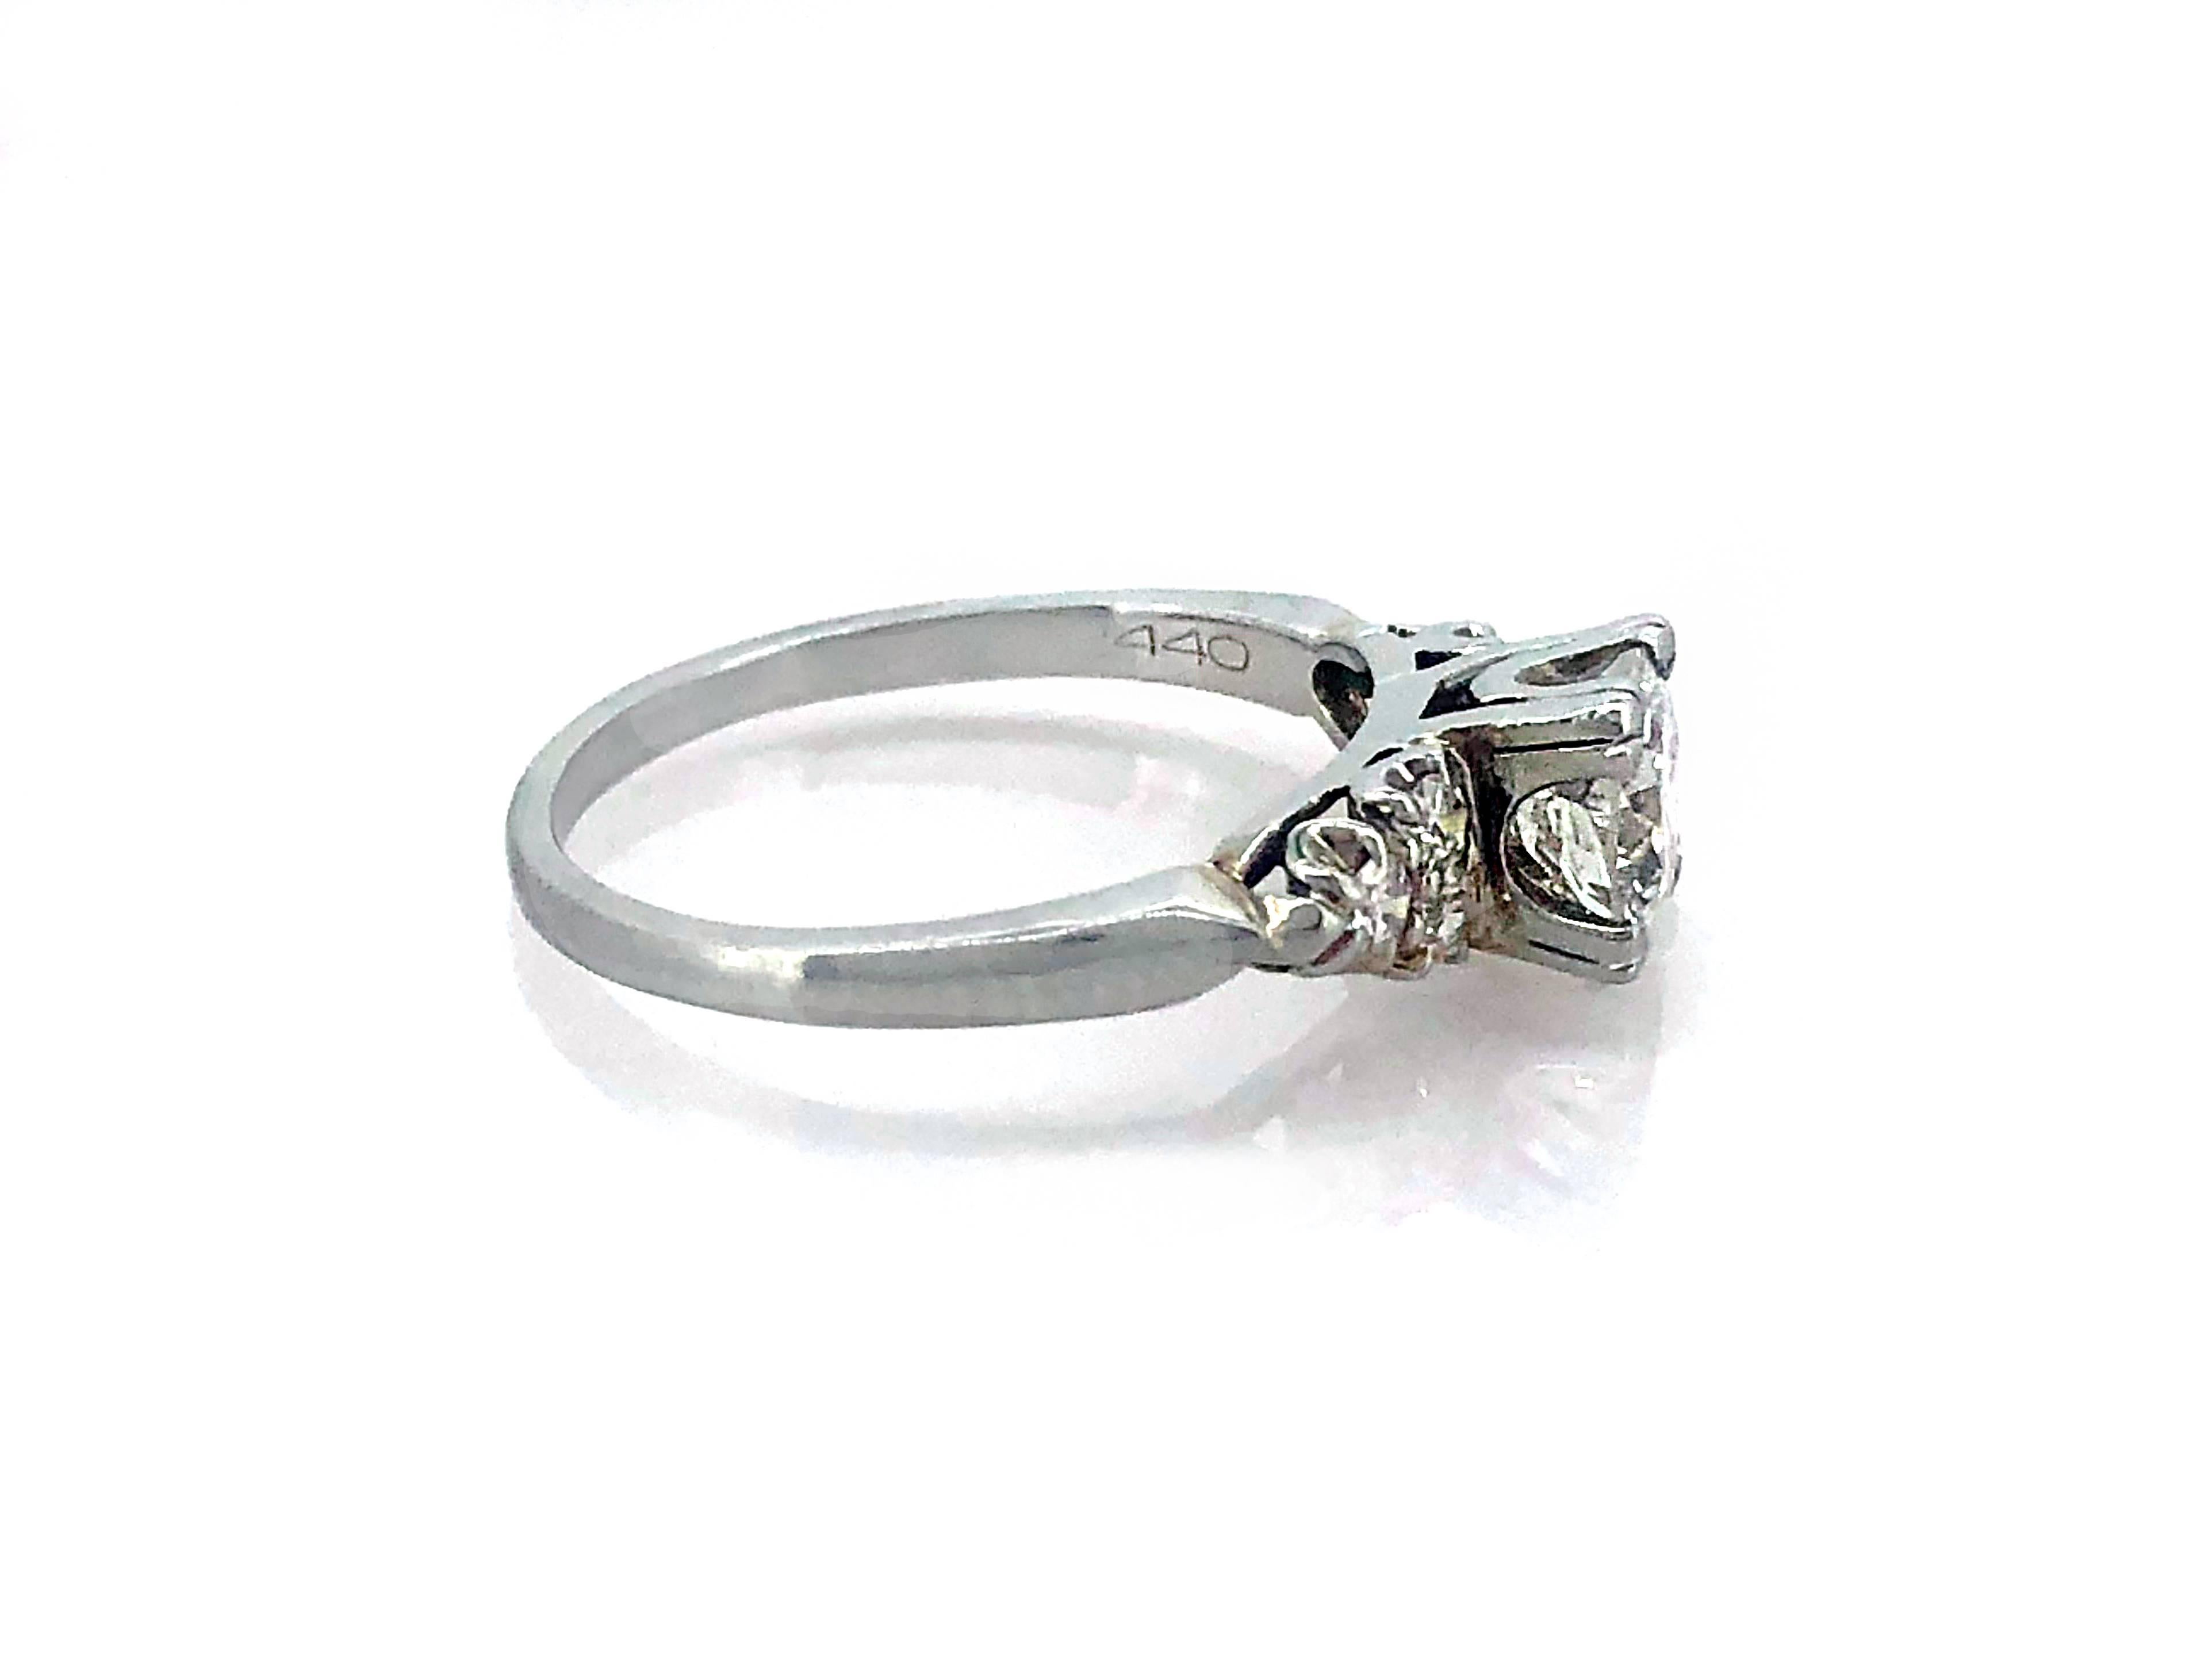 A classic Art Deco diamond Antique engagement ring which is crafted in 18k White Gold and features a .83ct. apx. Transitional cut diamond with SI3 clarity (100% Eye Clean) and G color. The center diamond is accented with .25ct. apx. T.W. of single